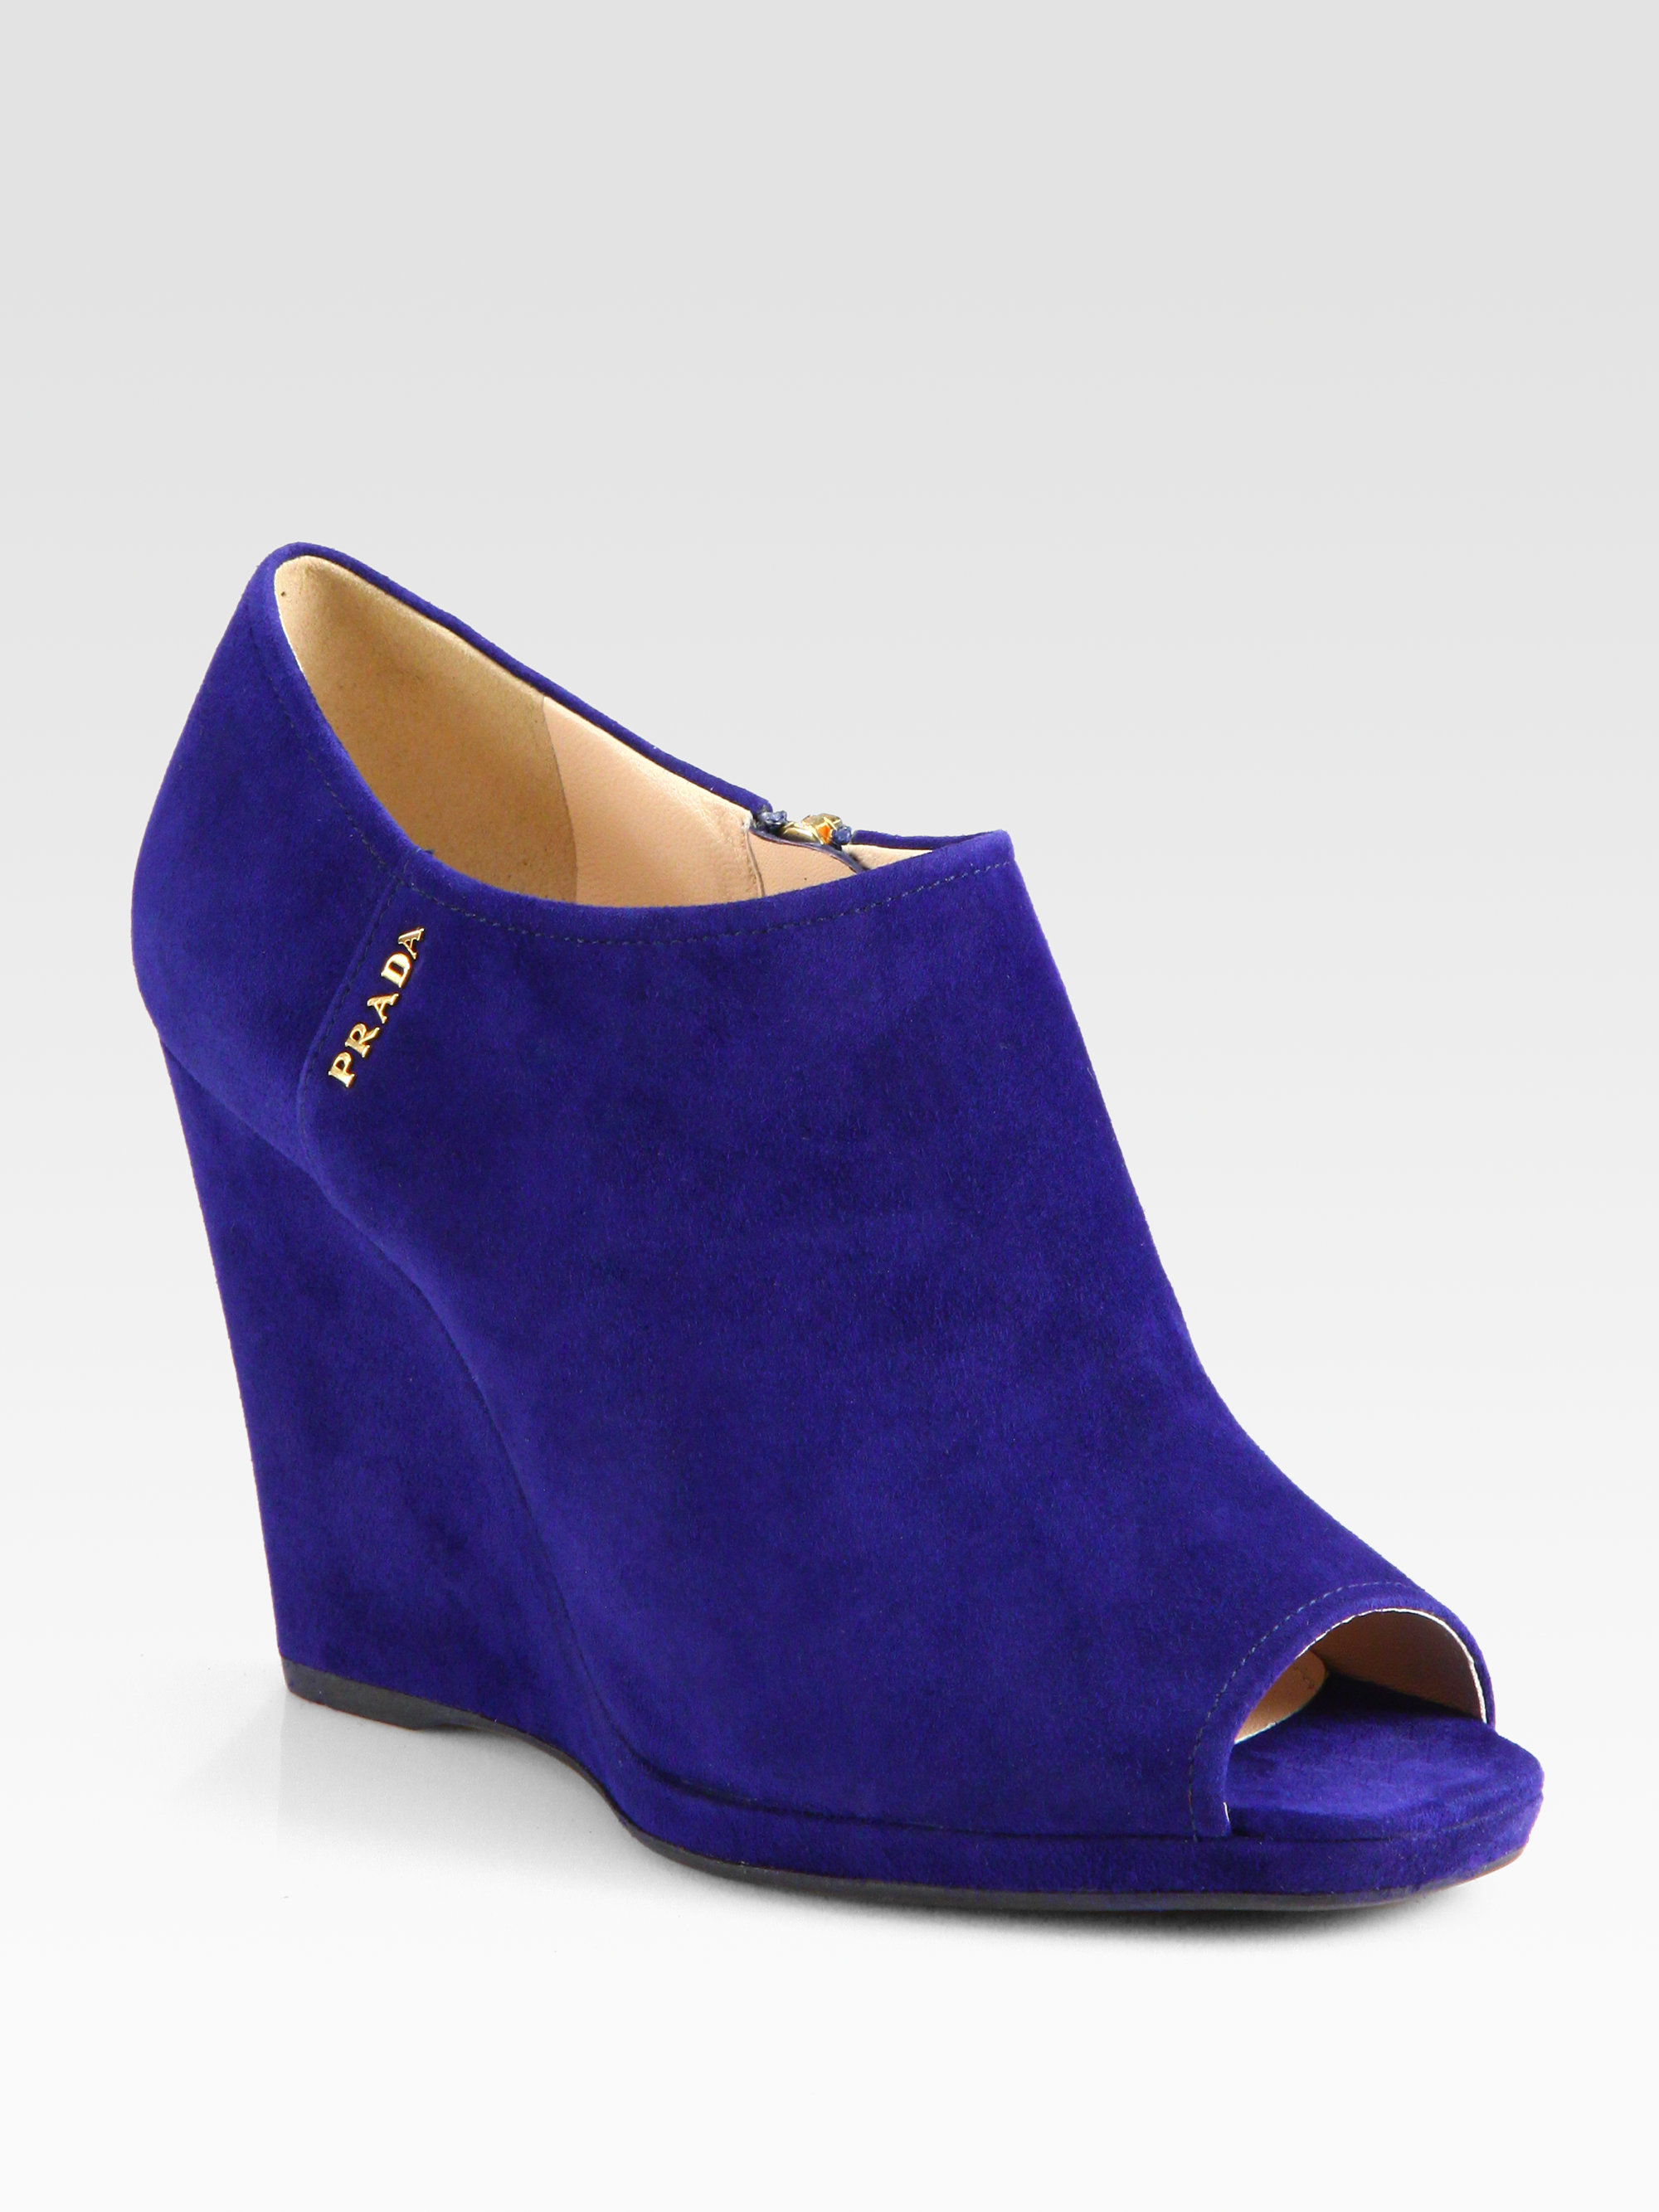 blue wedge ankle boots